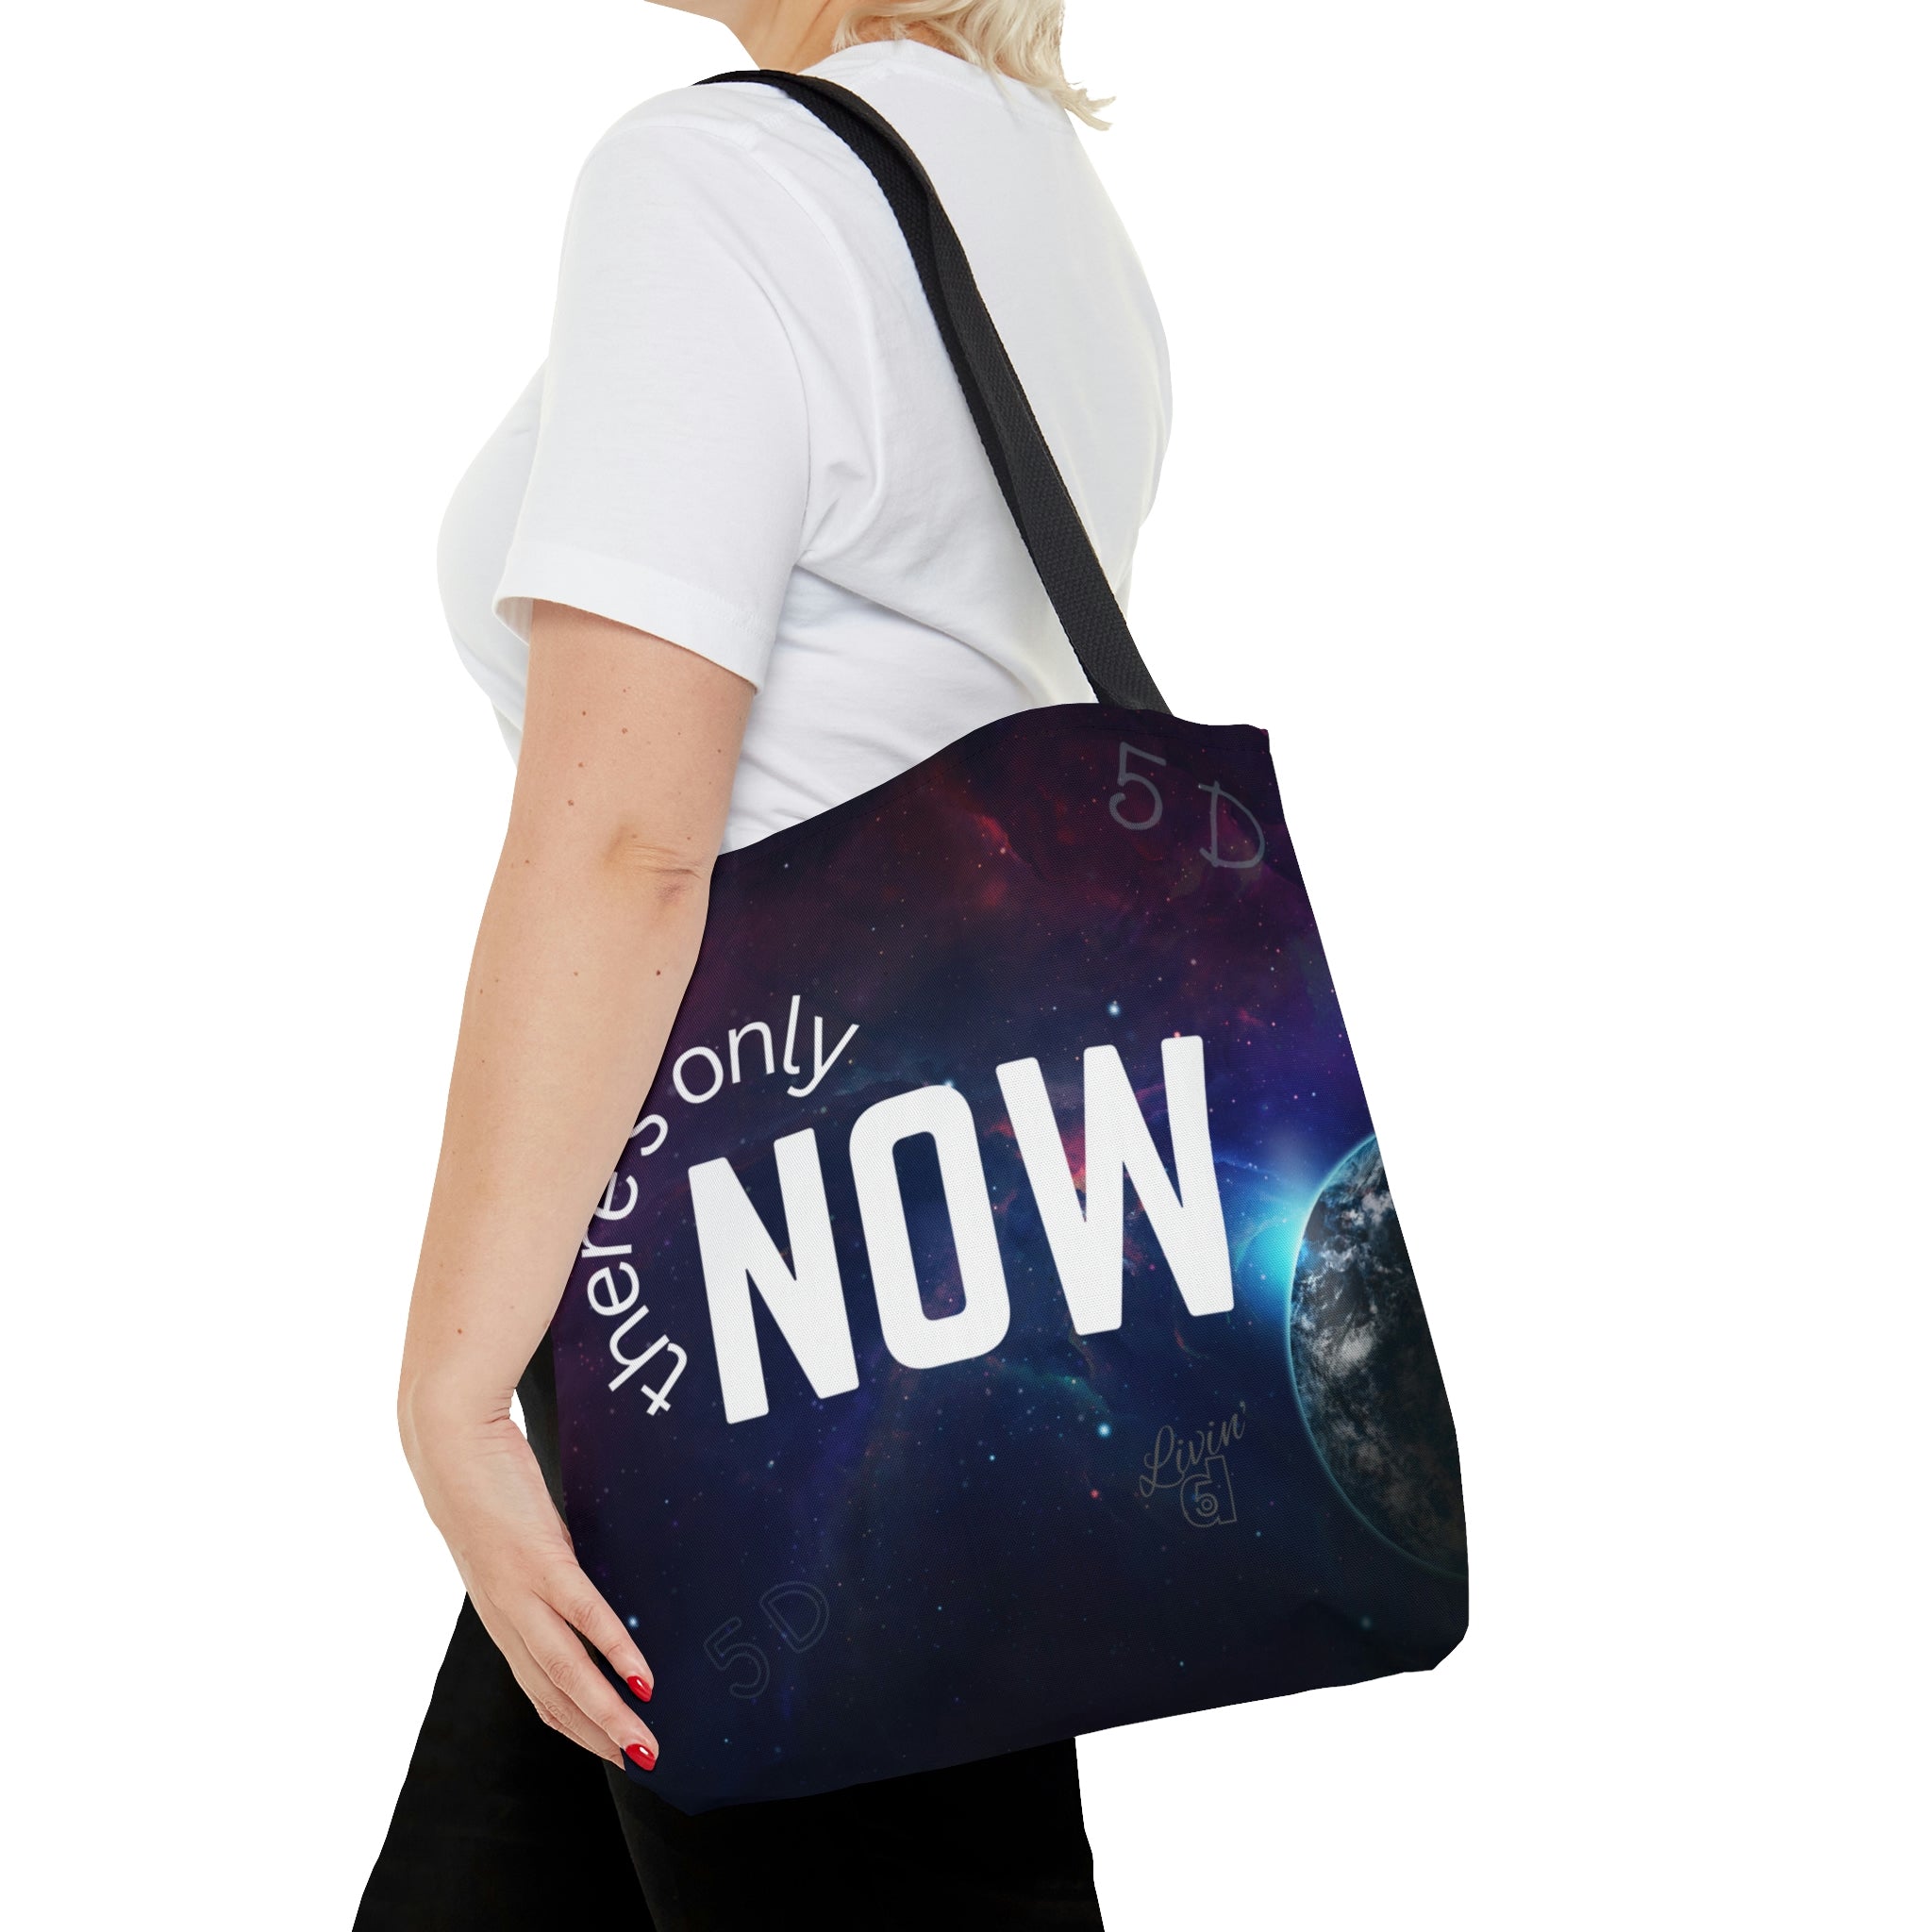 There's Only NOW Inspirational Tote Bag, Inspirational Tote, Tote Bag Aesthetic Quote, Tote Bags Quote, Spiritual Tote Bag, Spiritual Gifts